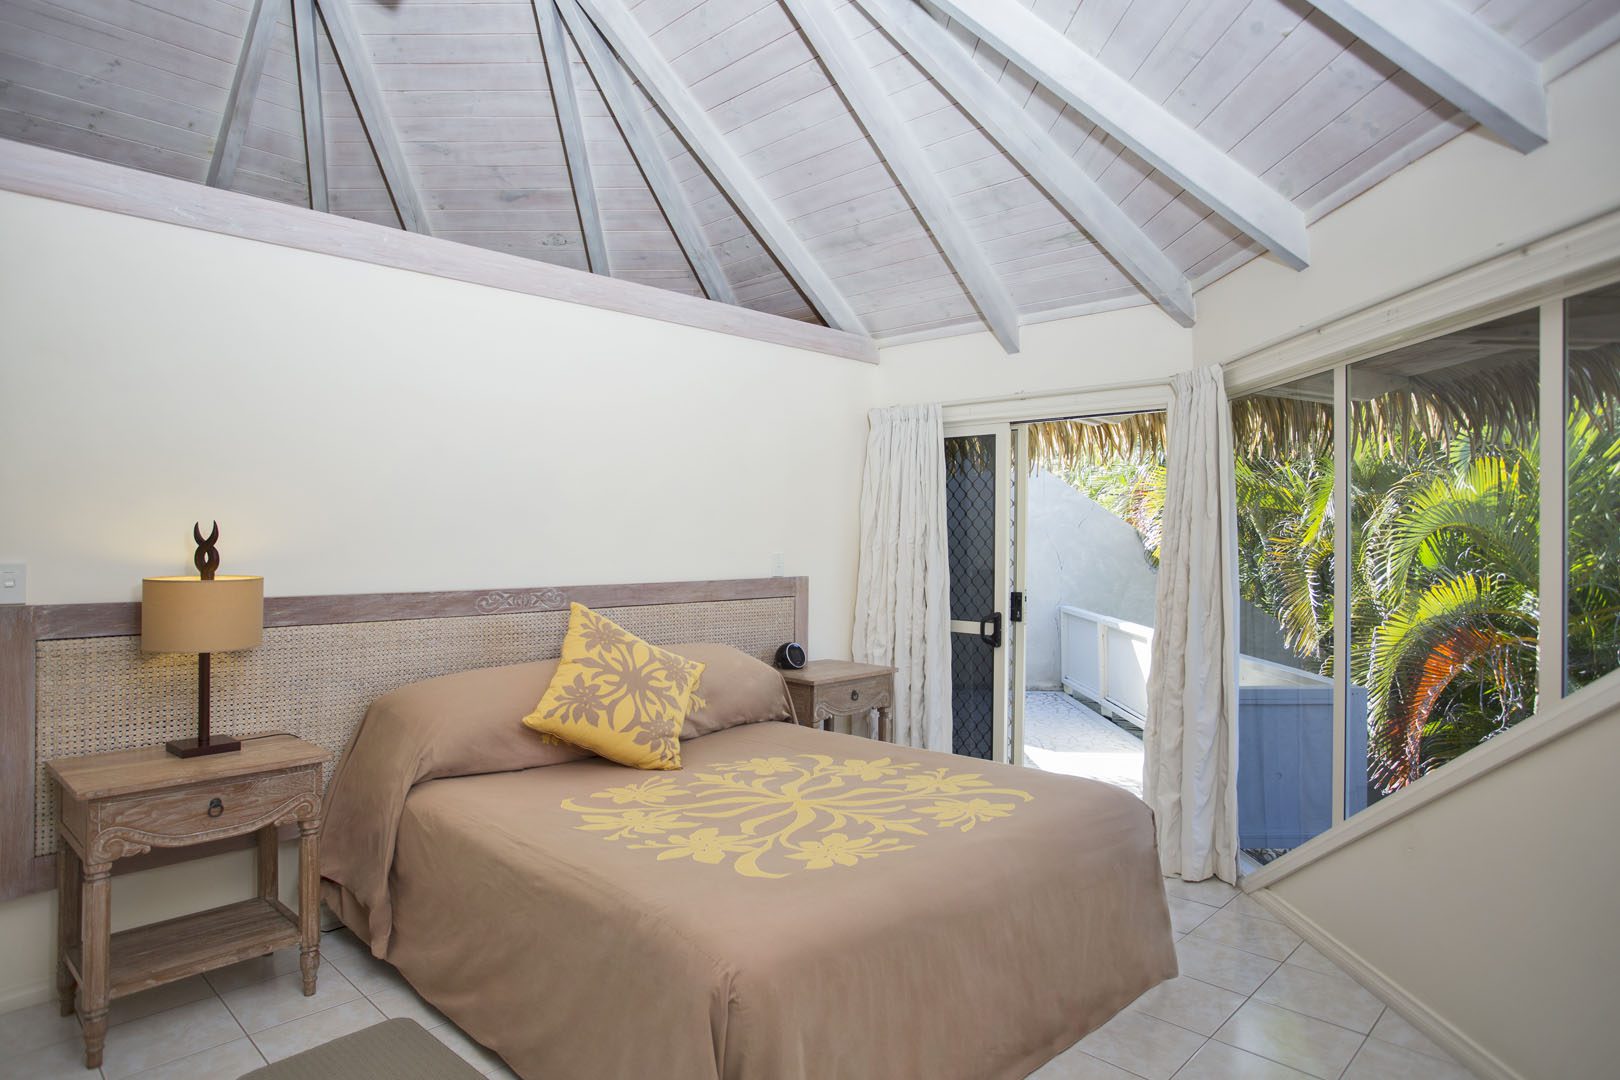 View inside the master bedroom with a beautiful Polynesian bedspread, high white wash ceilings and sliding door connecting to the outside area